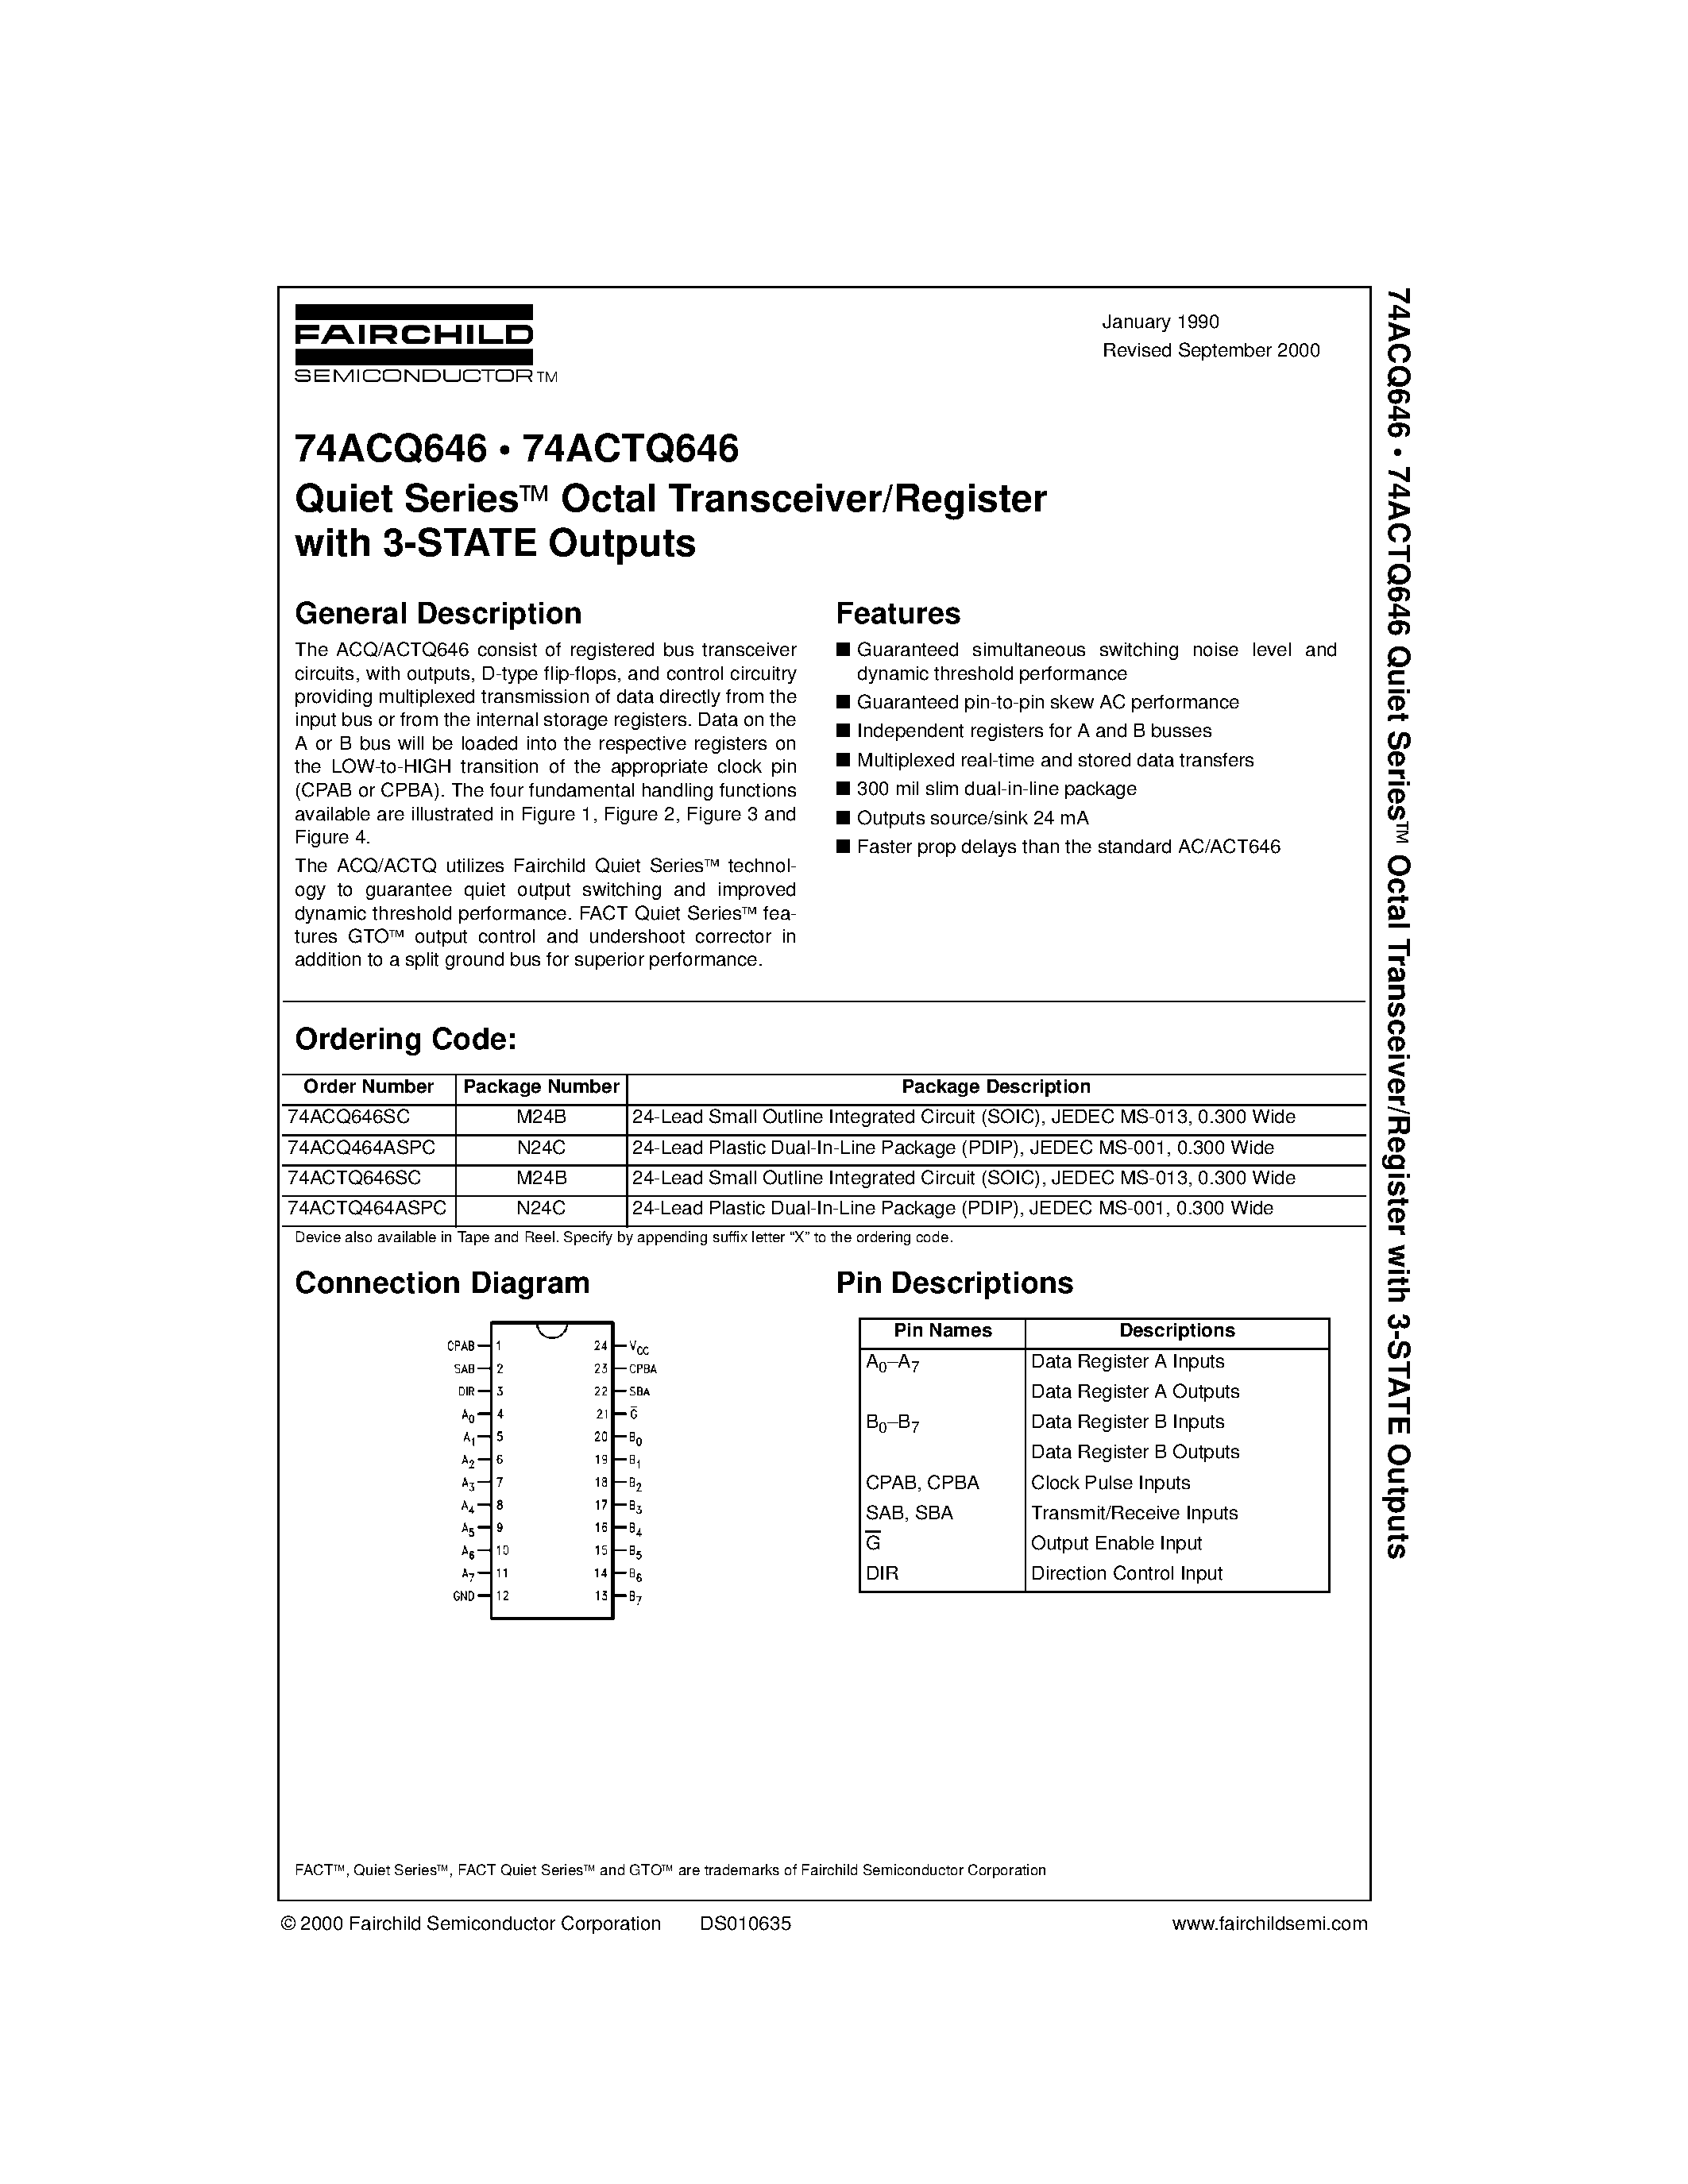 Datasheet 74ACQ657 - Quiet Series Octal Bidirectional Transceiver with 8-Bit Parity Generator/Checker and 3-STATE Outputs page 1